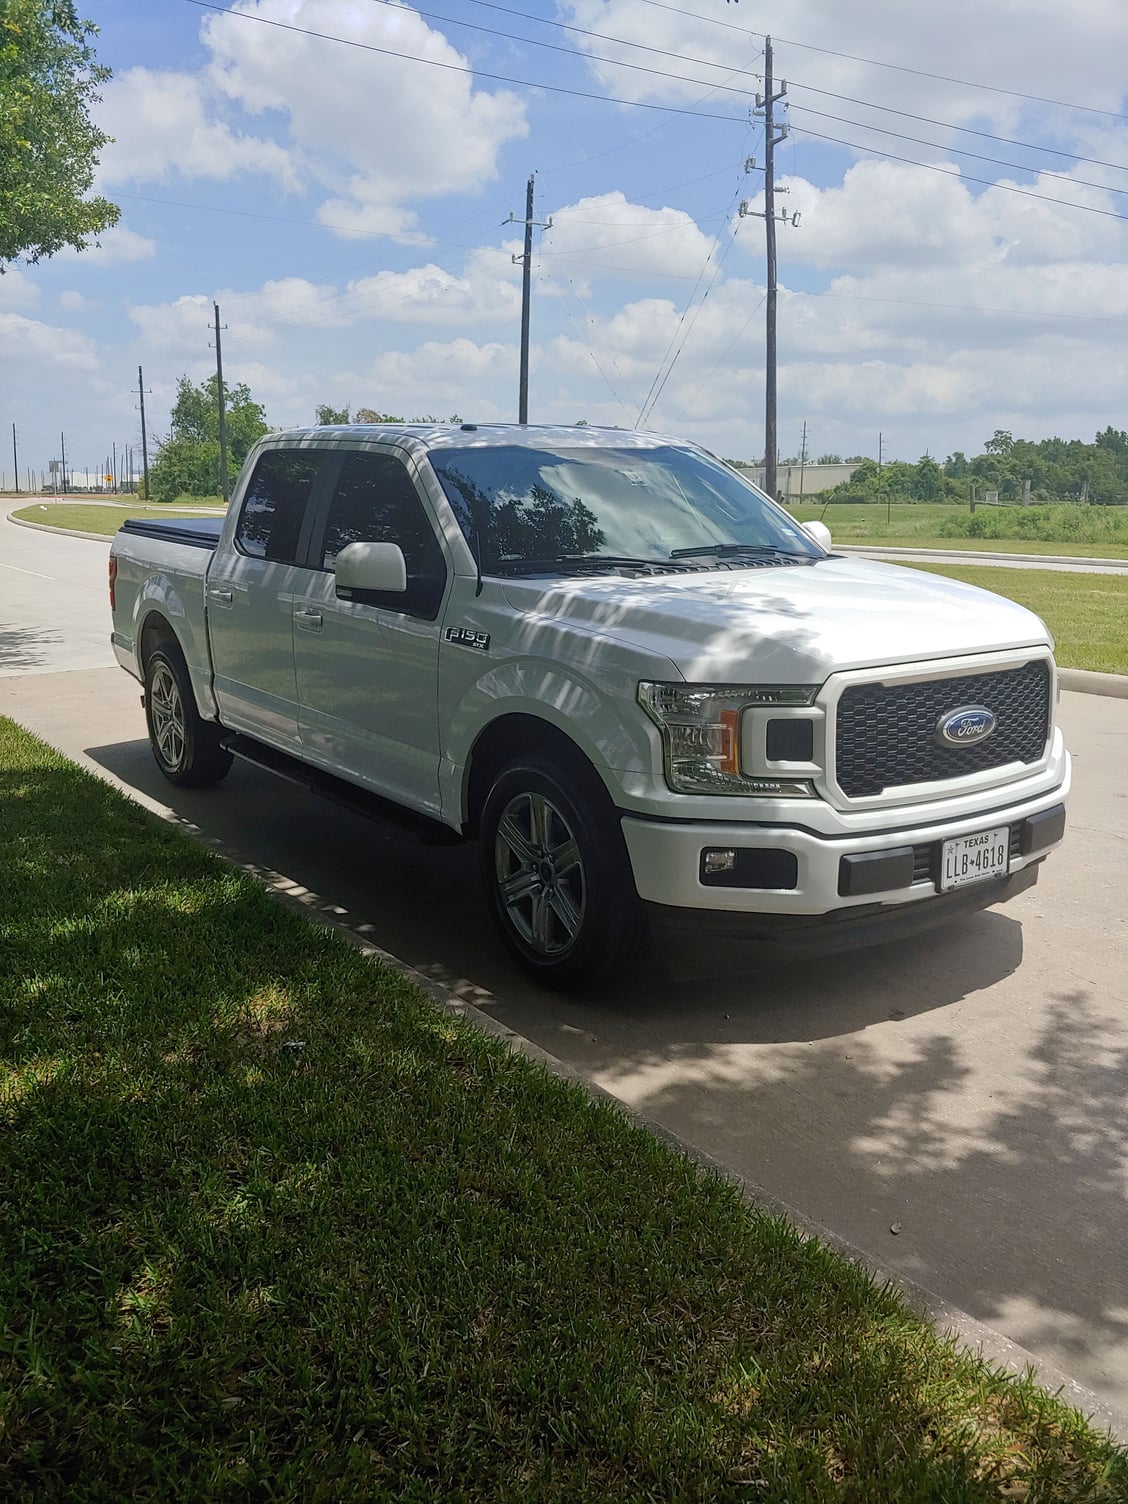 TopCoat F11 - Ford F150 Forum - Community of Ford Truck Fans